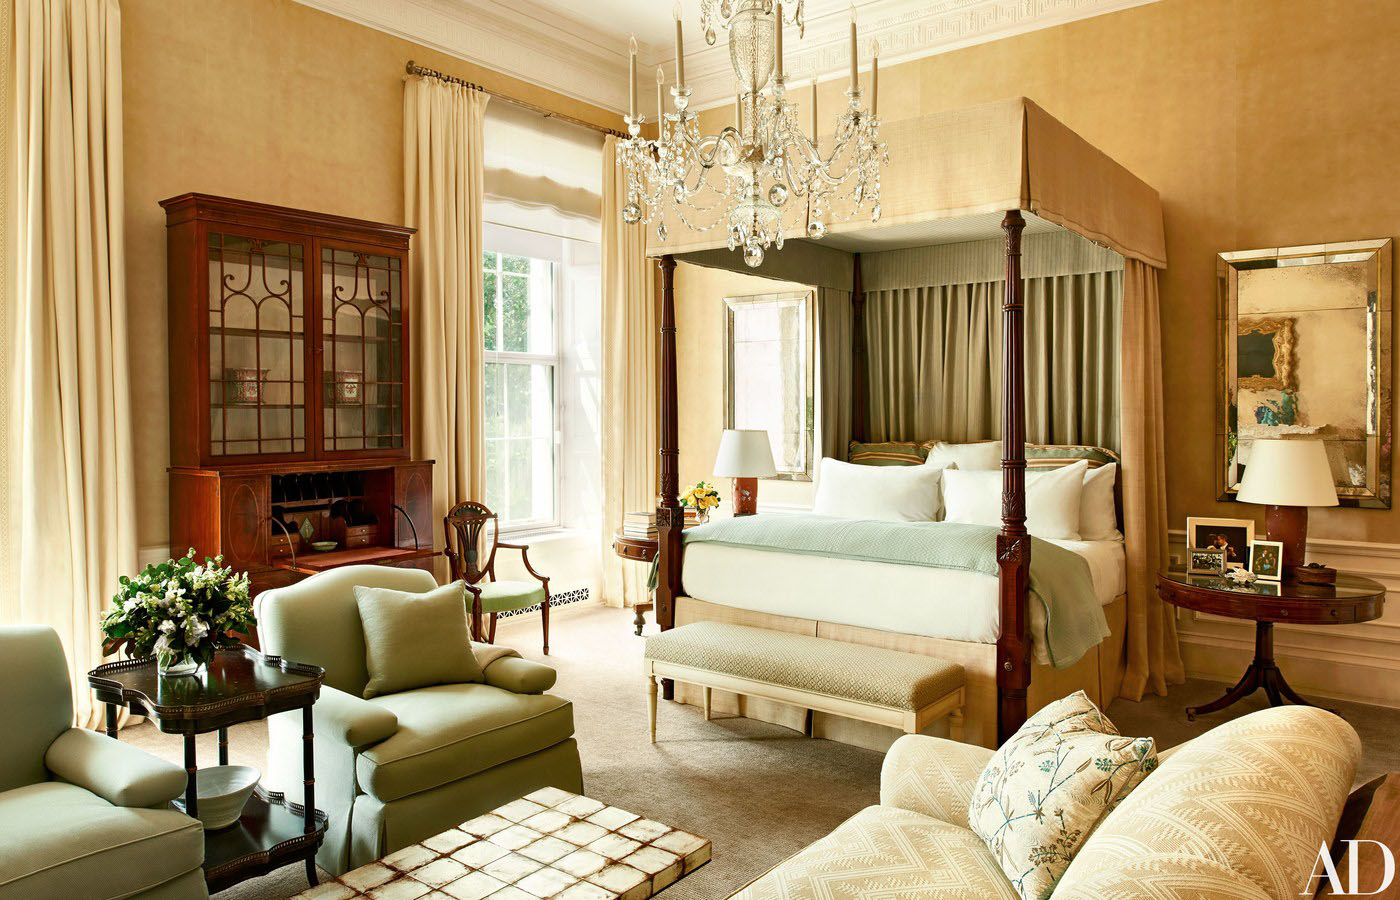 The White House Master Suite